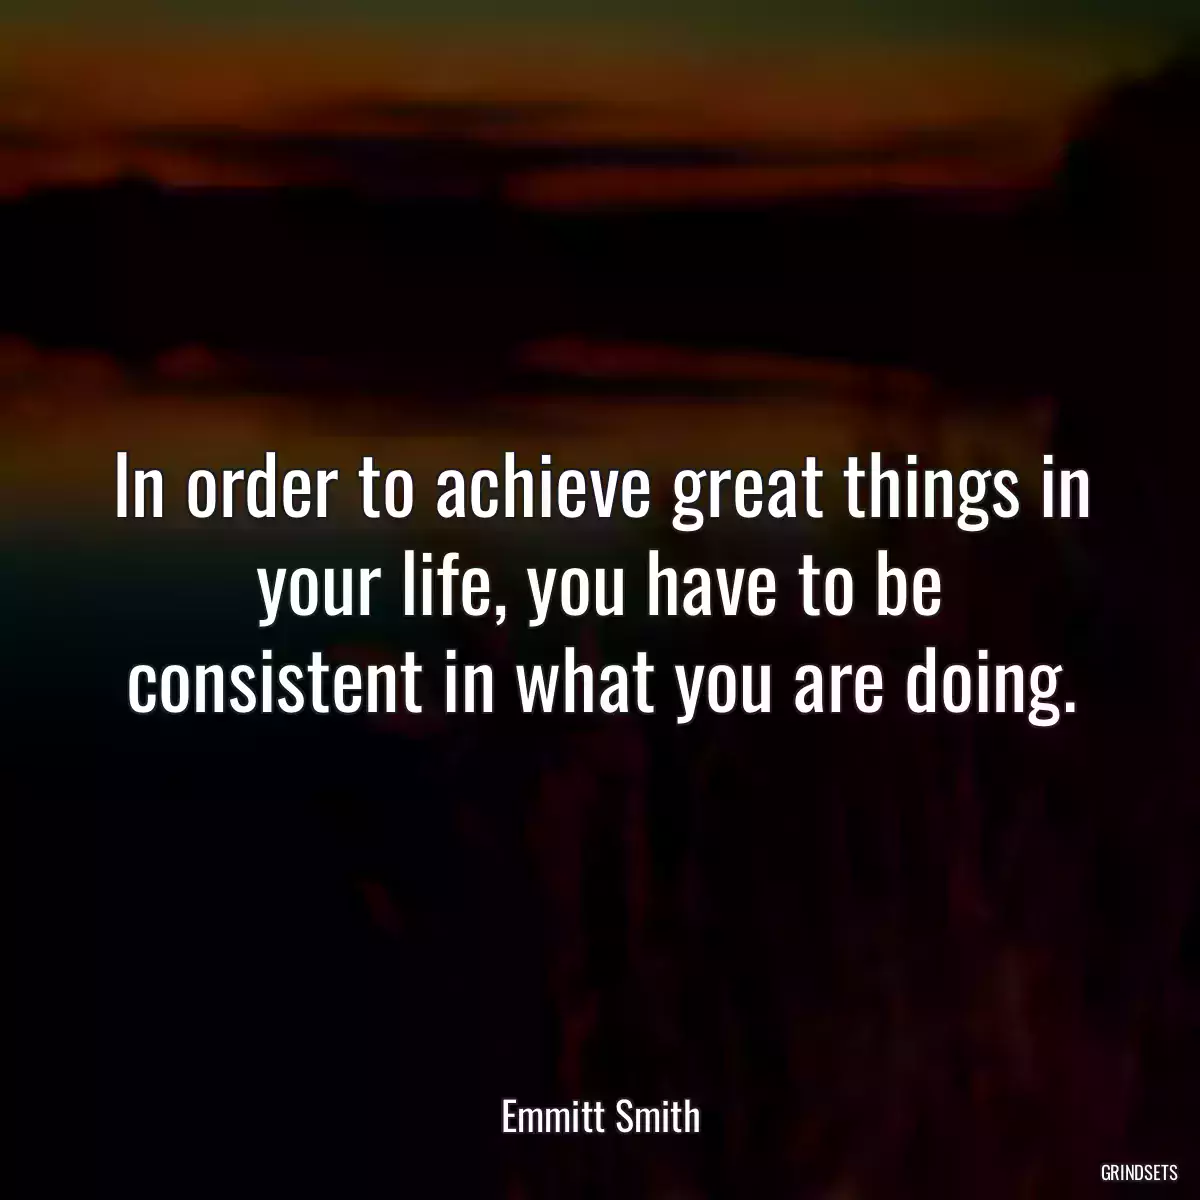 In order to achieve great things in your life, you have to be consistent in what you are doing.